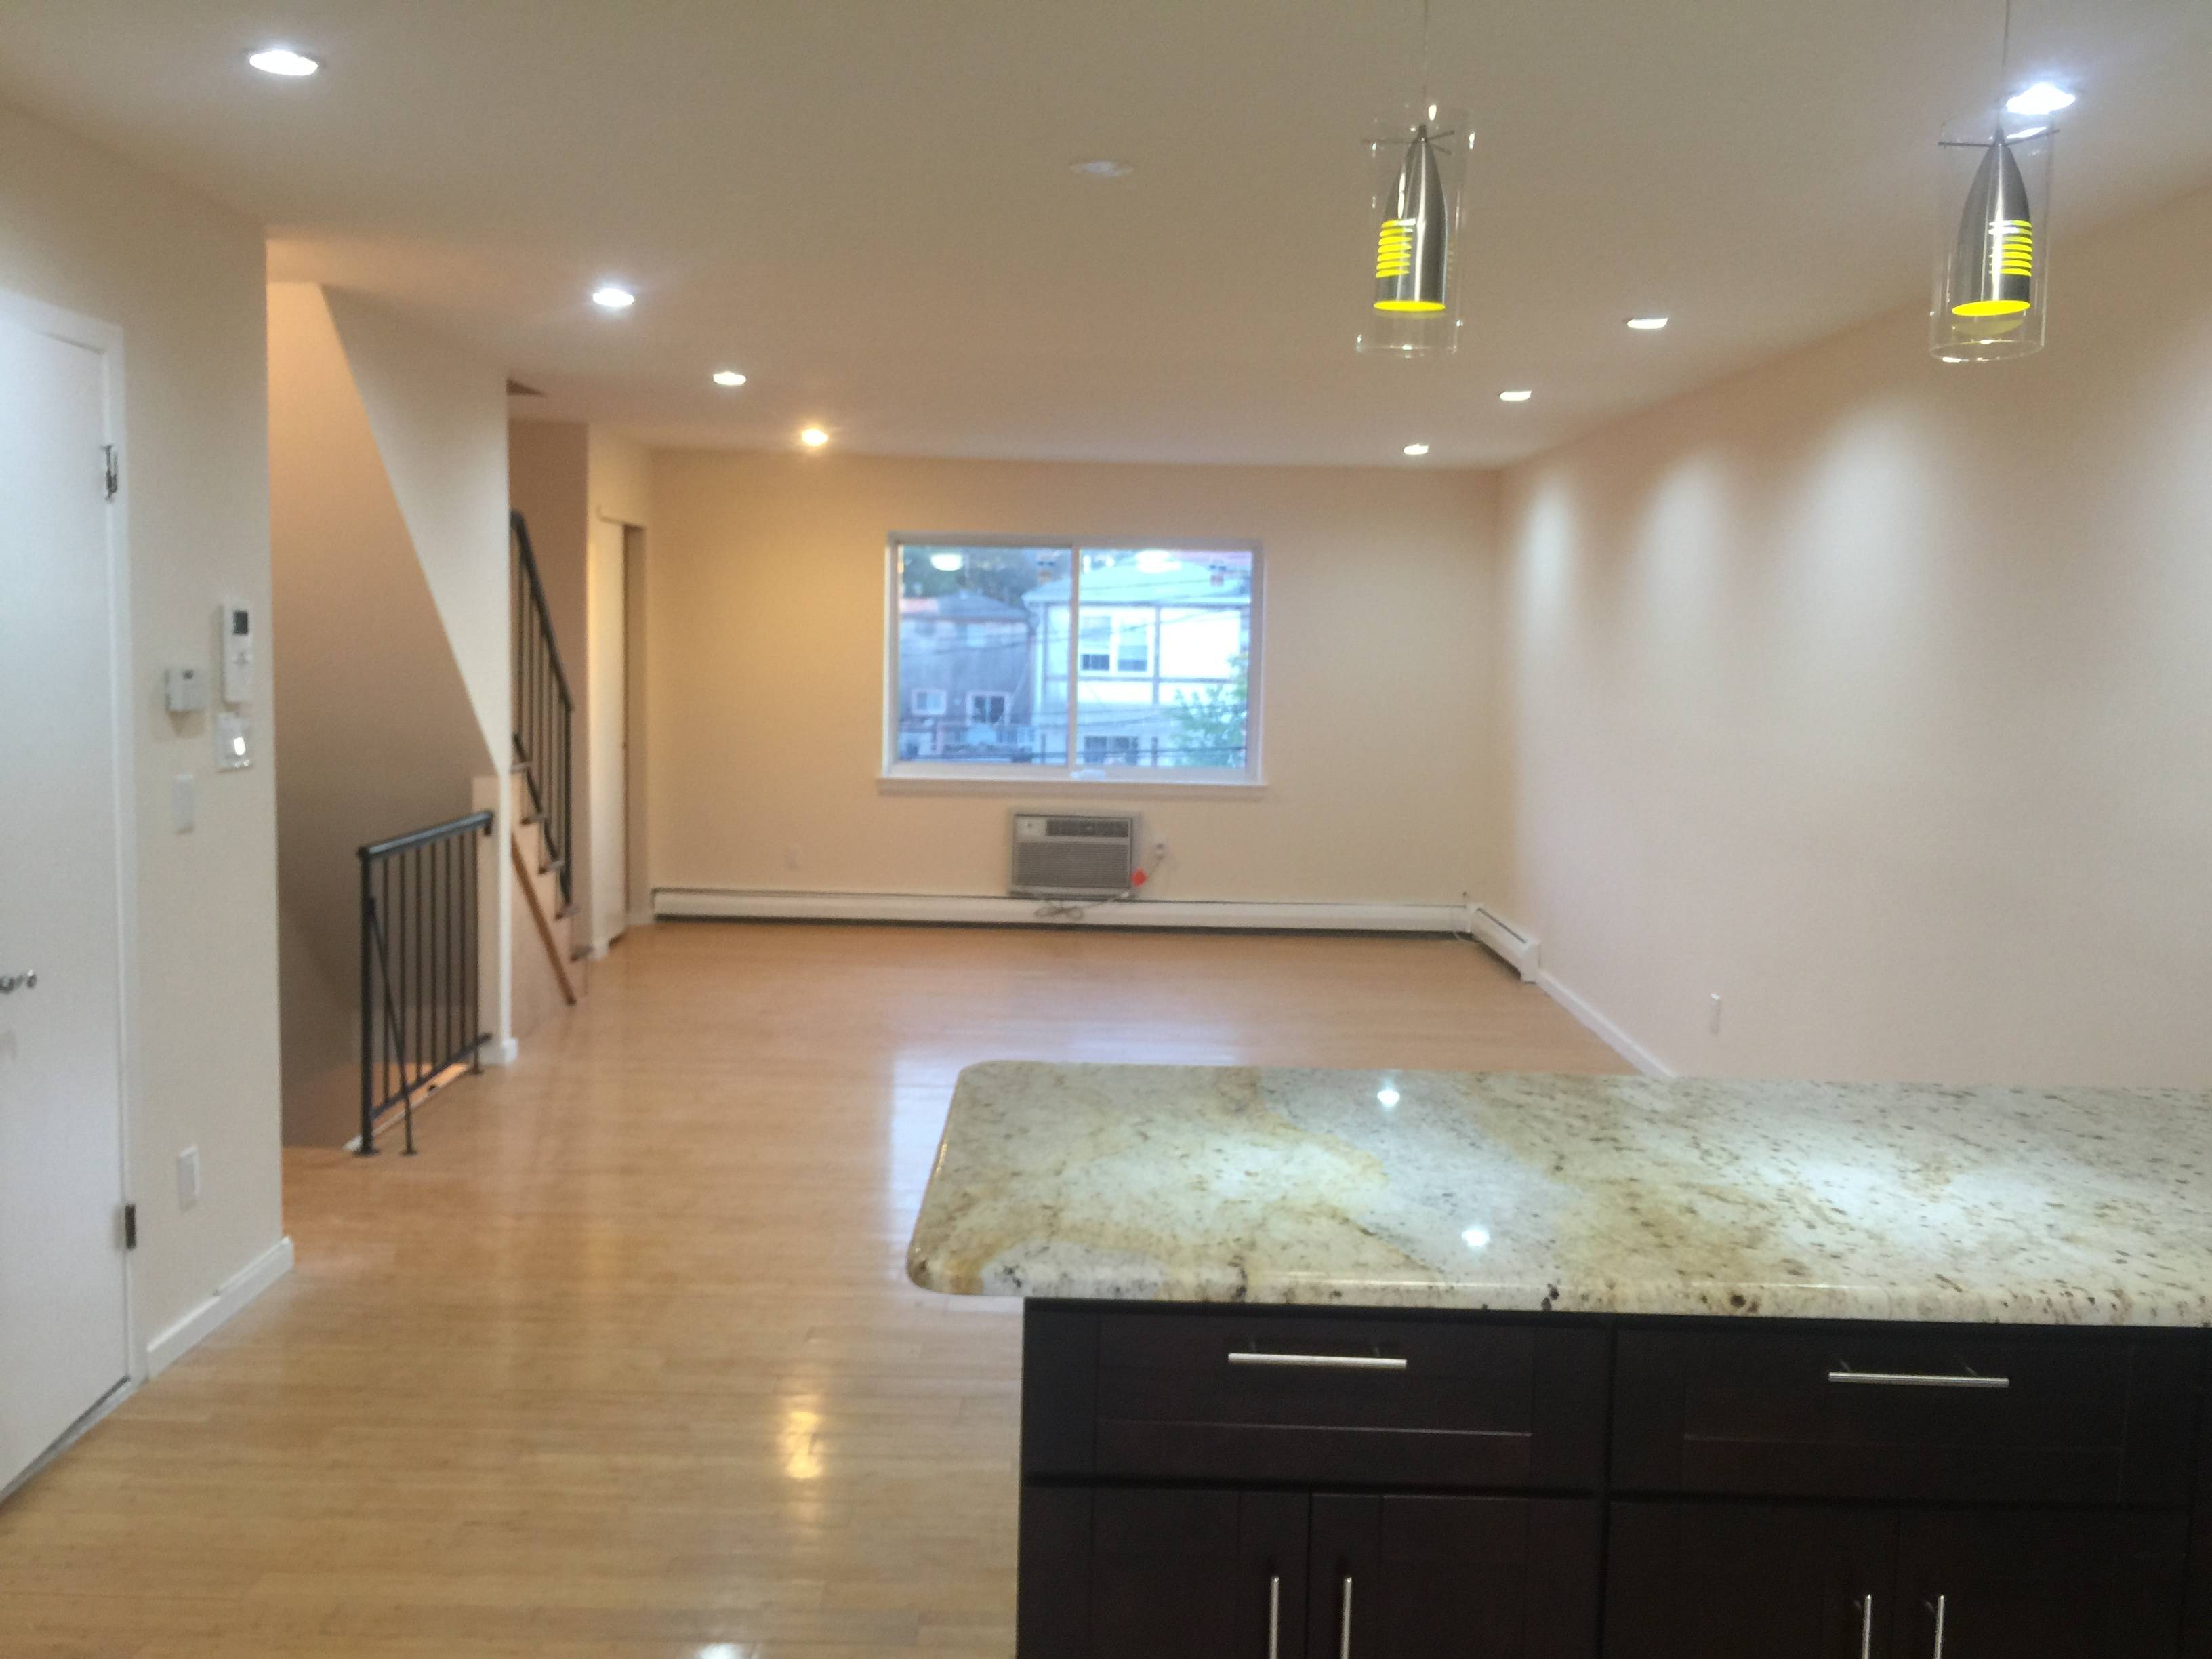 Brand new 3br duplex with private outdoor space In prime Marine Park area!! 